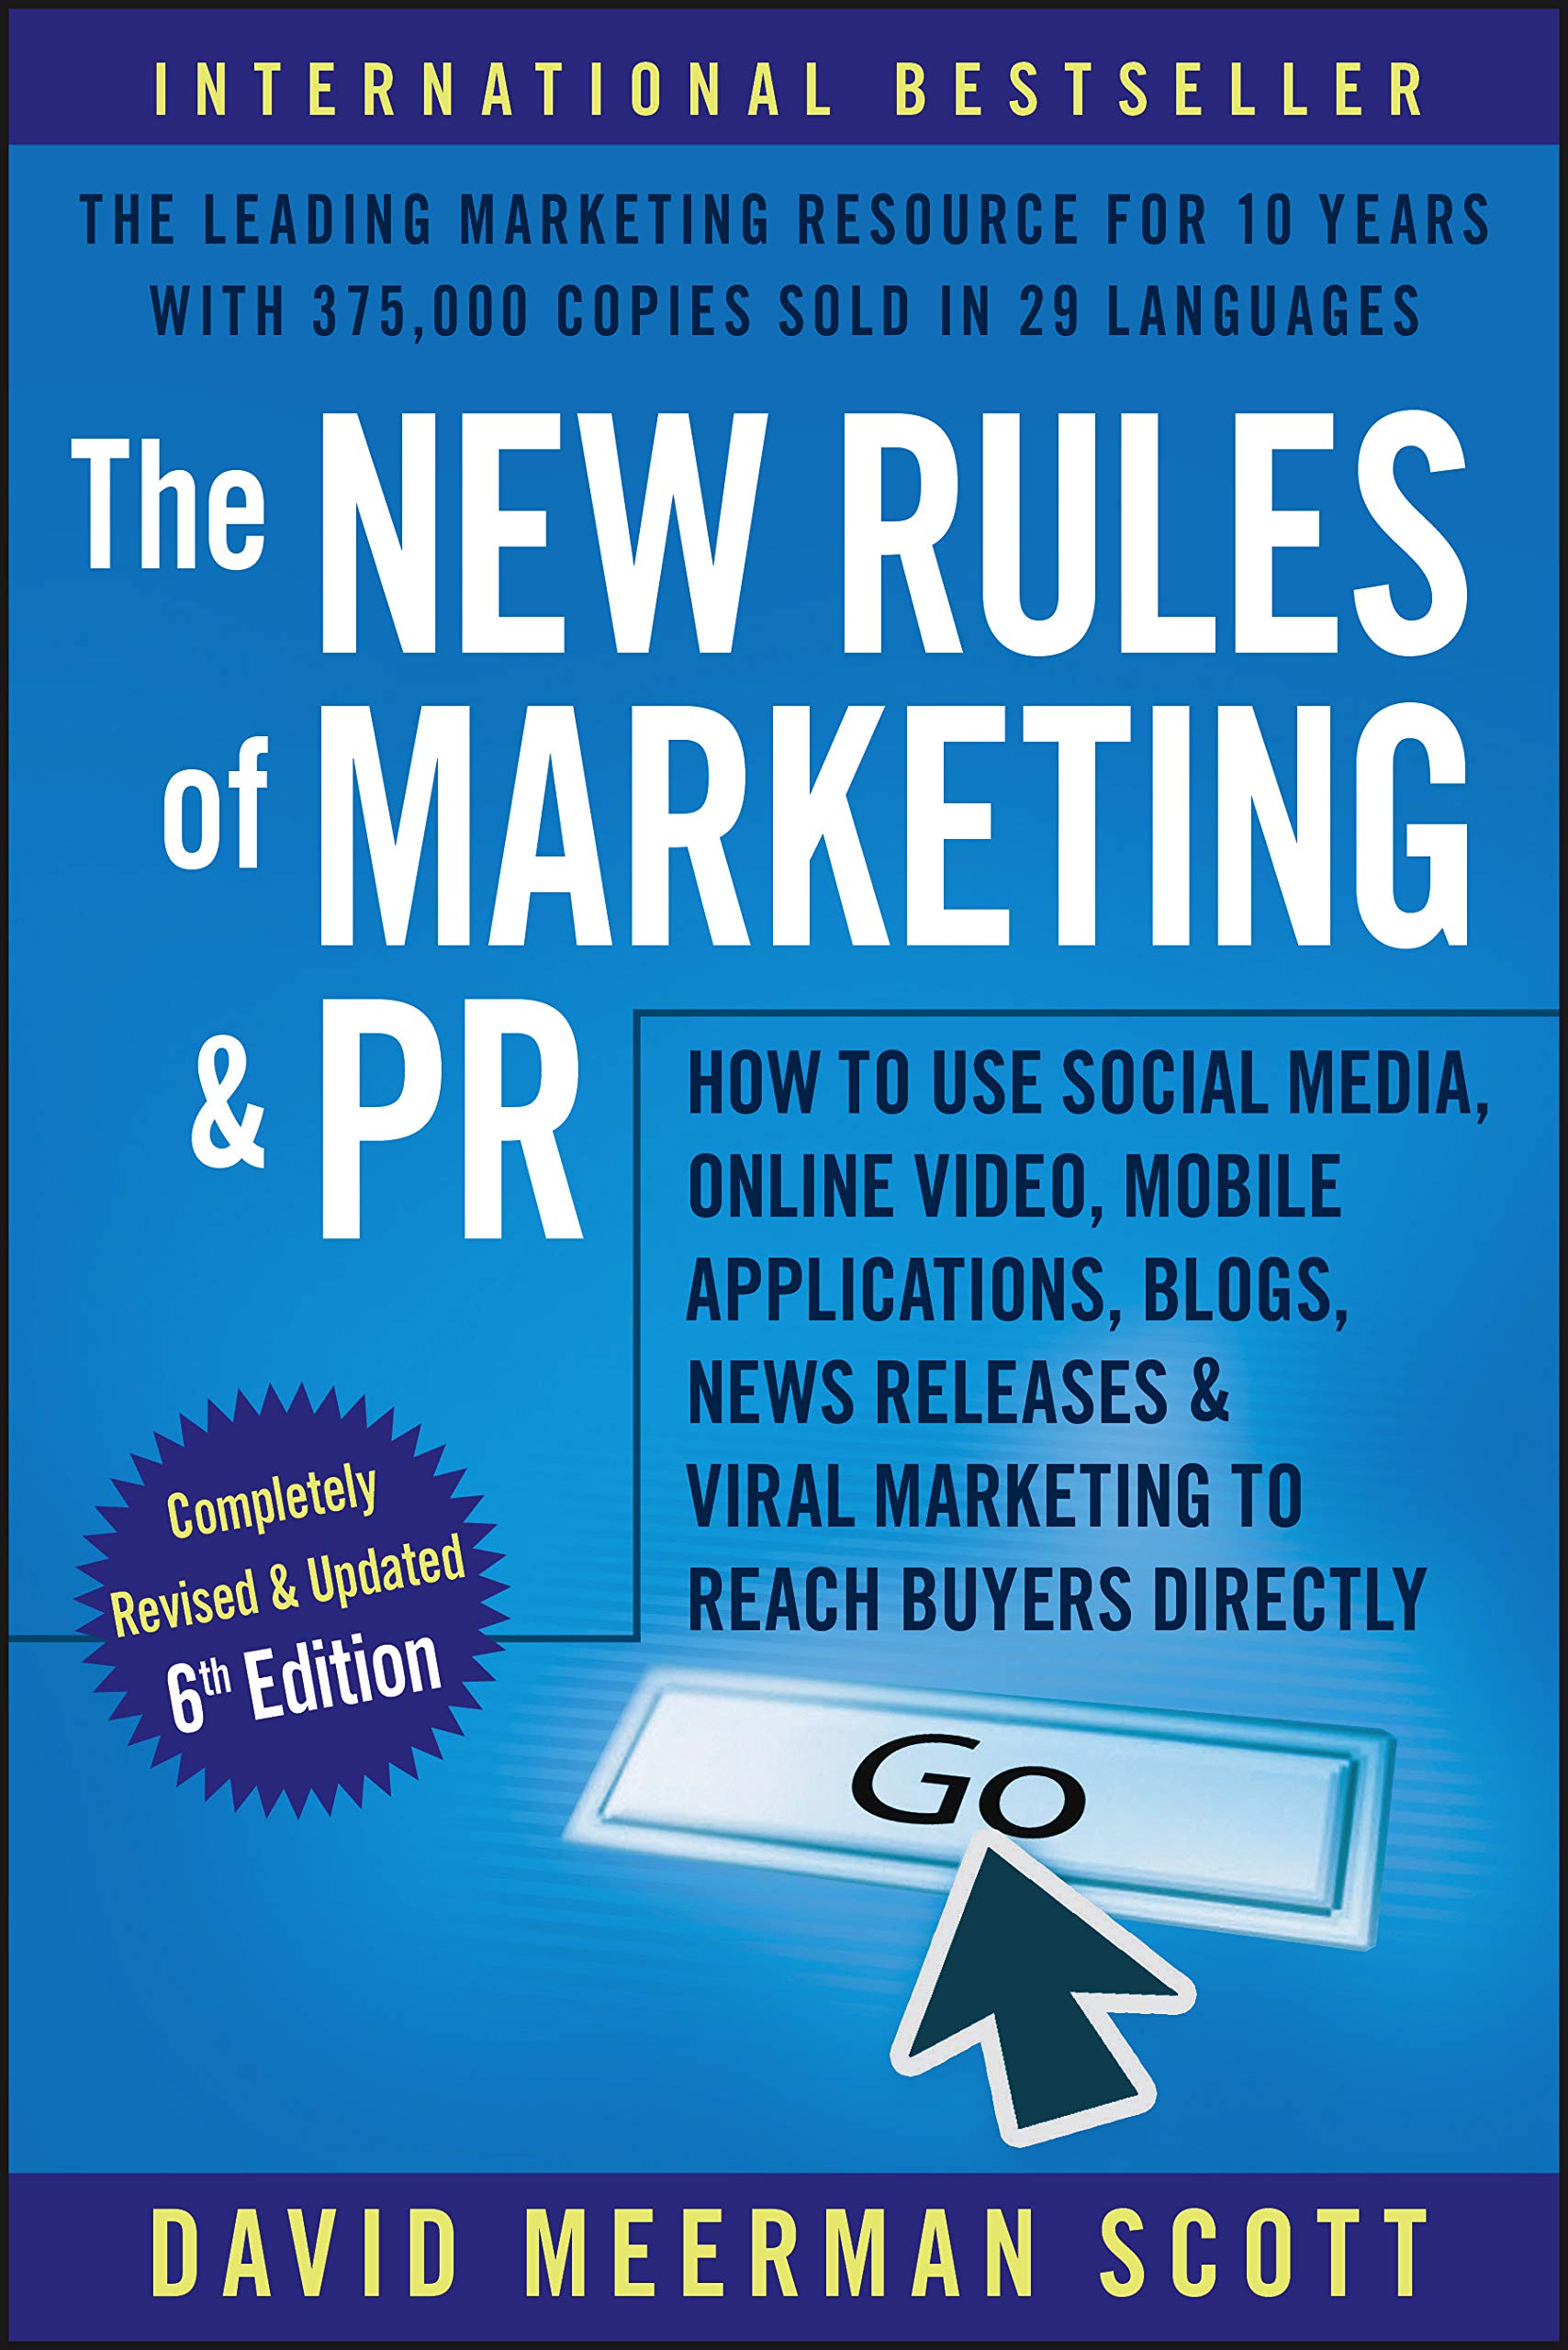 The new rules of marketing & pr :  how to use social media, online video, mobile applications, blogs, news releases, and viral marketing to reach buyers directly